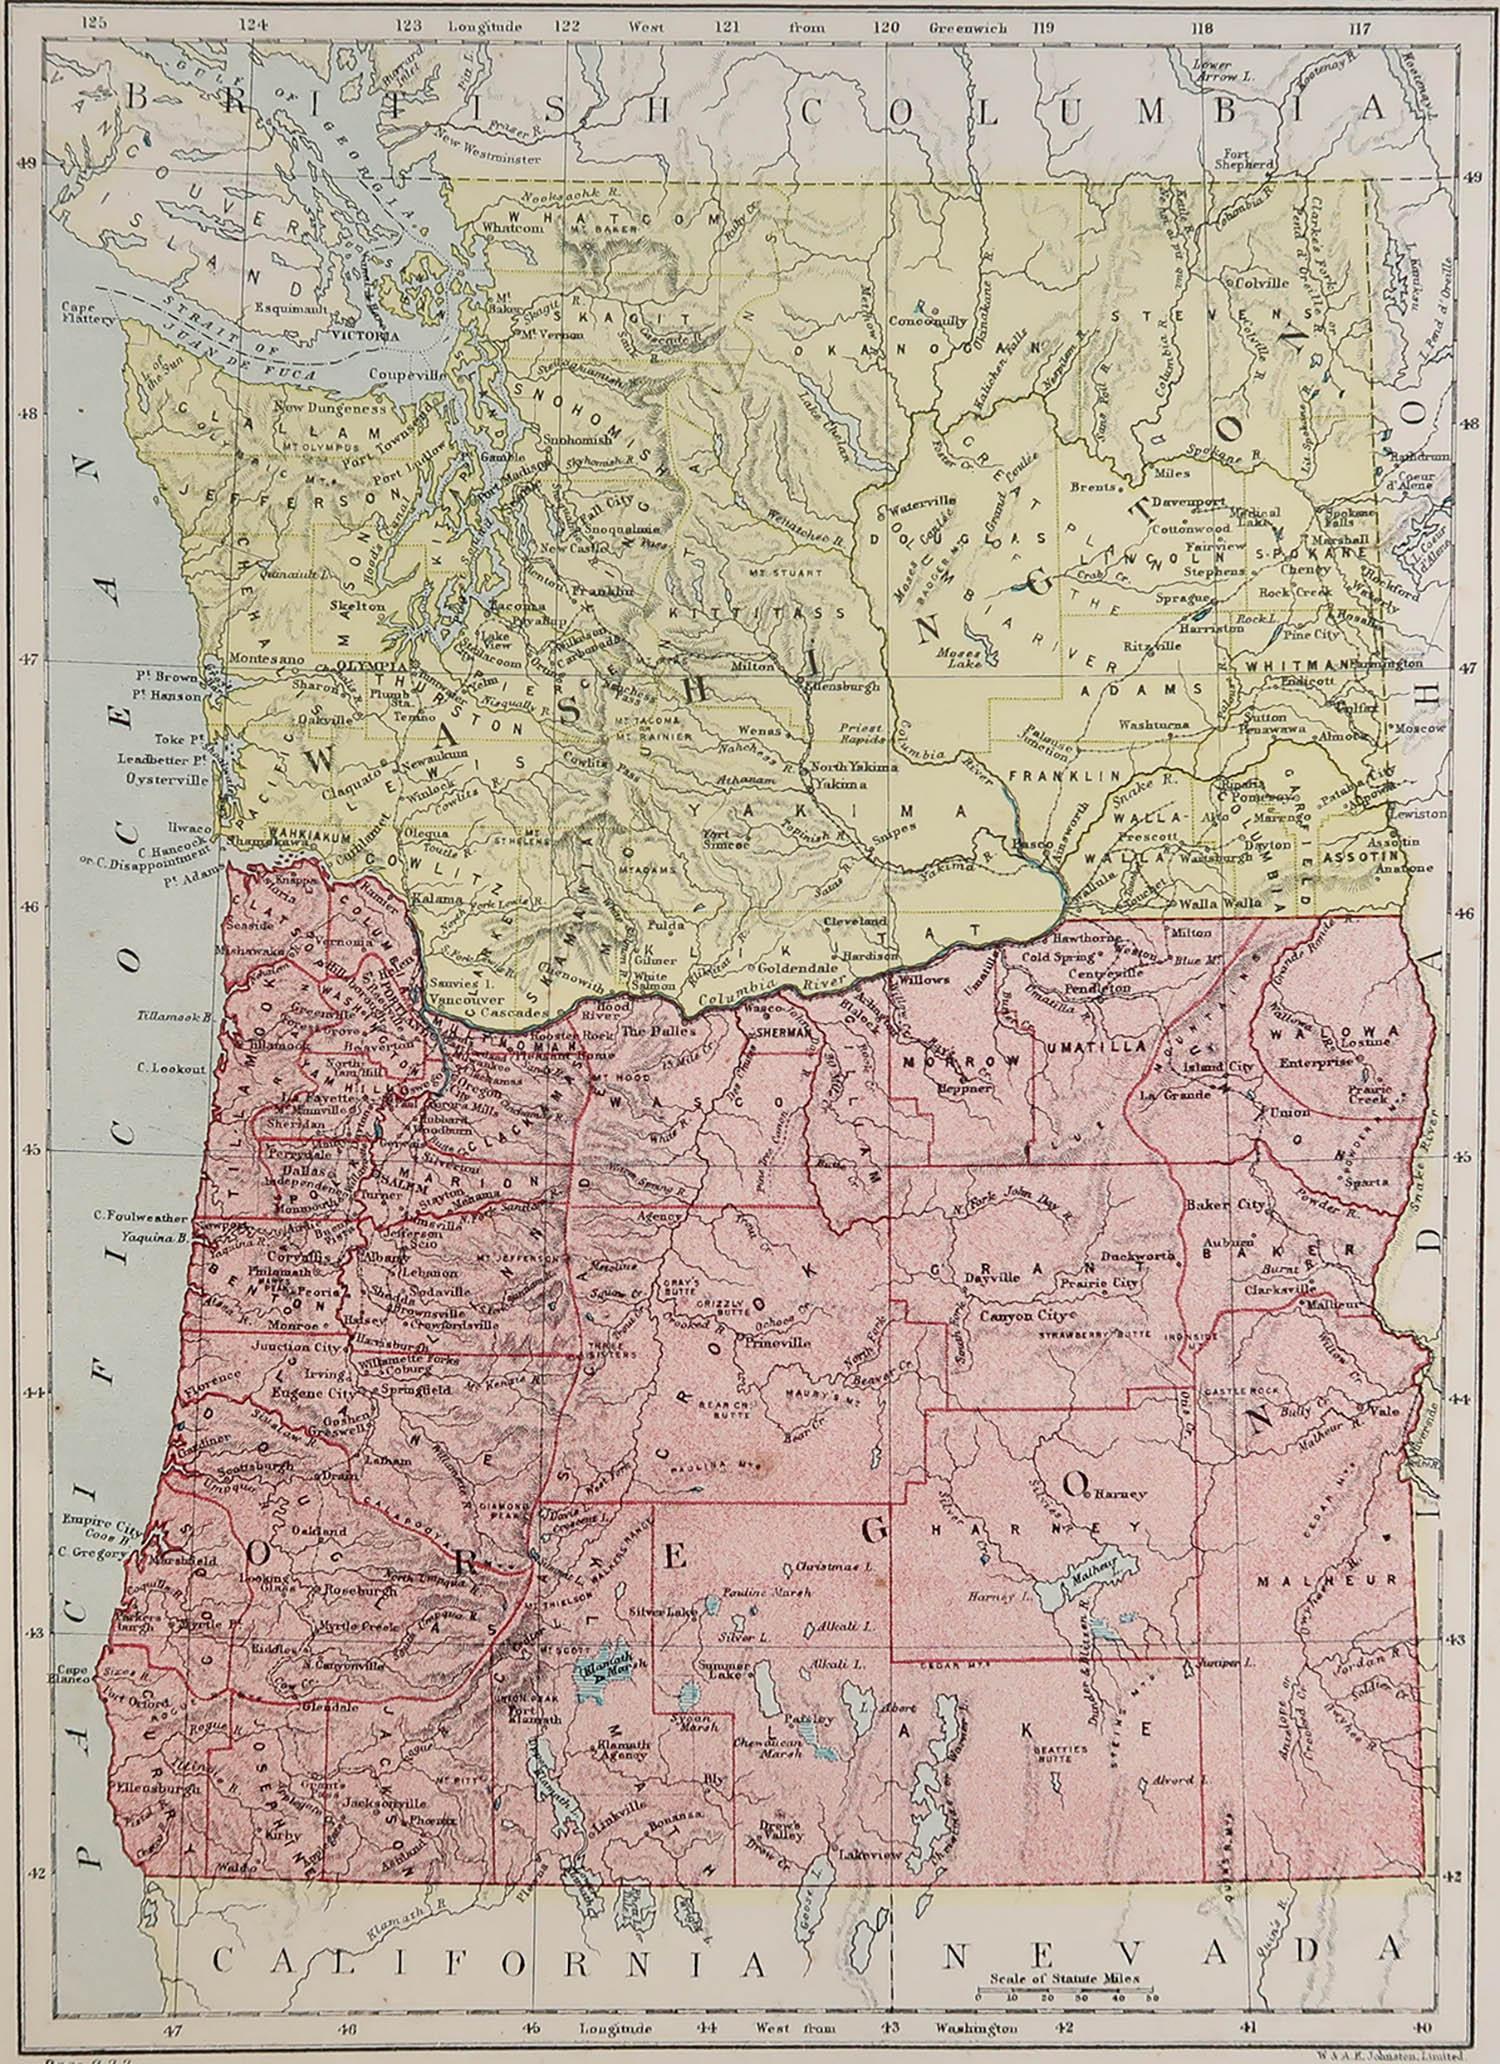 Great map of Oregon

Drawn and Engraved by W. & A.K. Johnston

Published By A & C Black, Edinburgh.

Original colour

Unframed.








